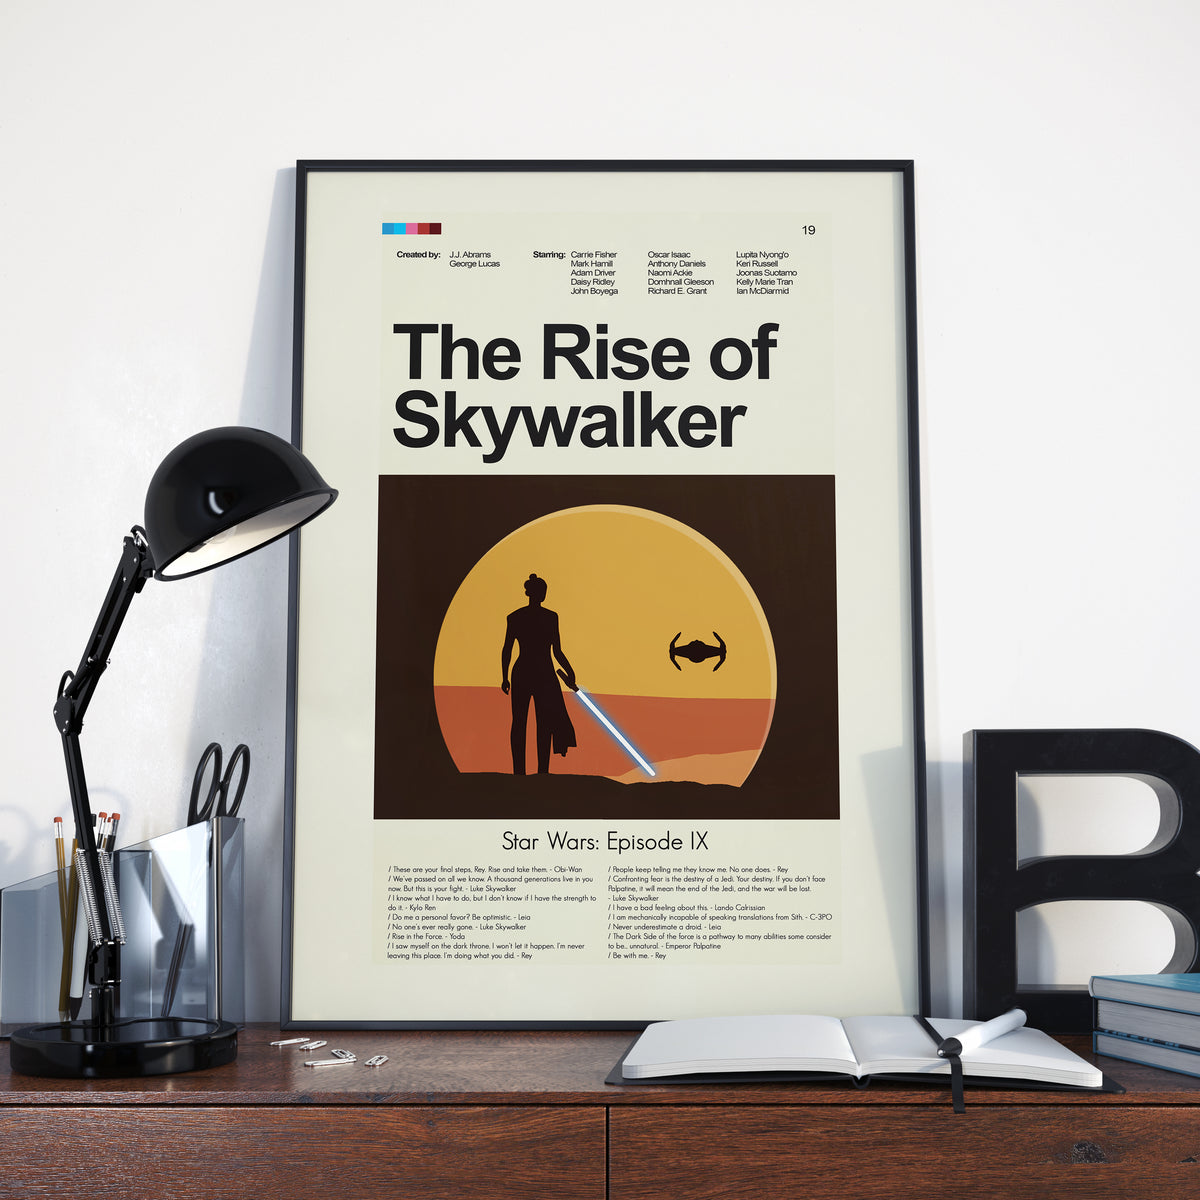 The Rise of Skywalker: Star Wars Episode IX - Death Star | 12"x18" or 18"x24" Print only